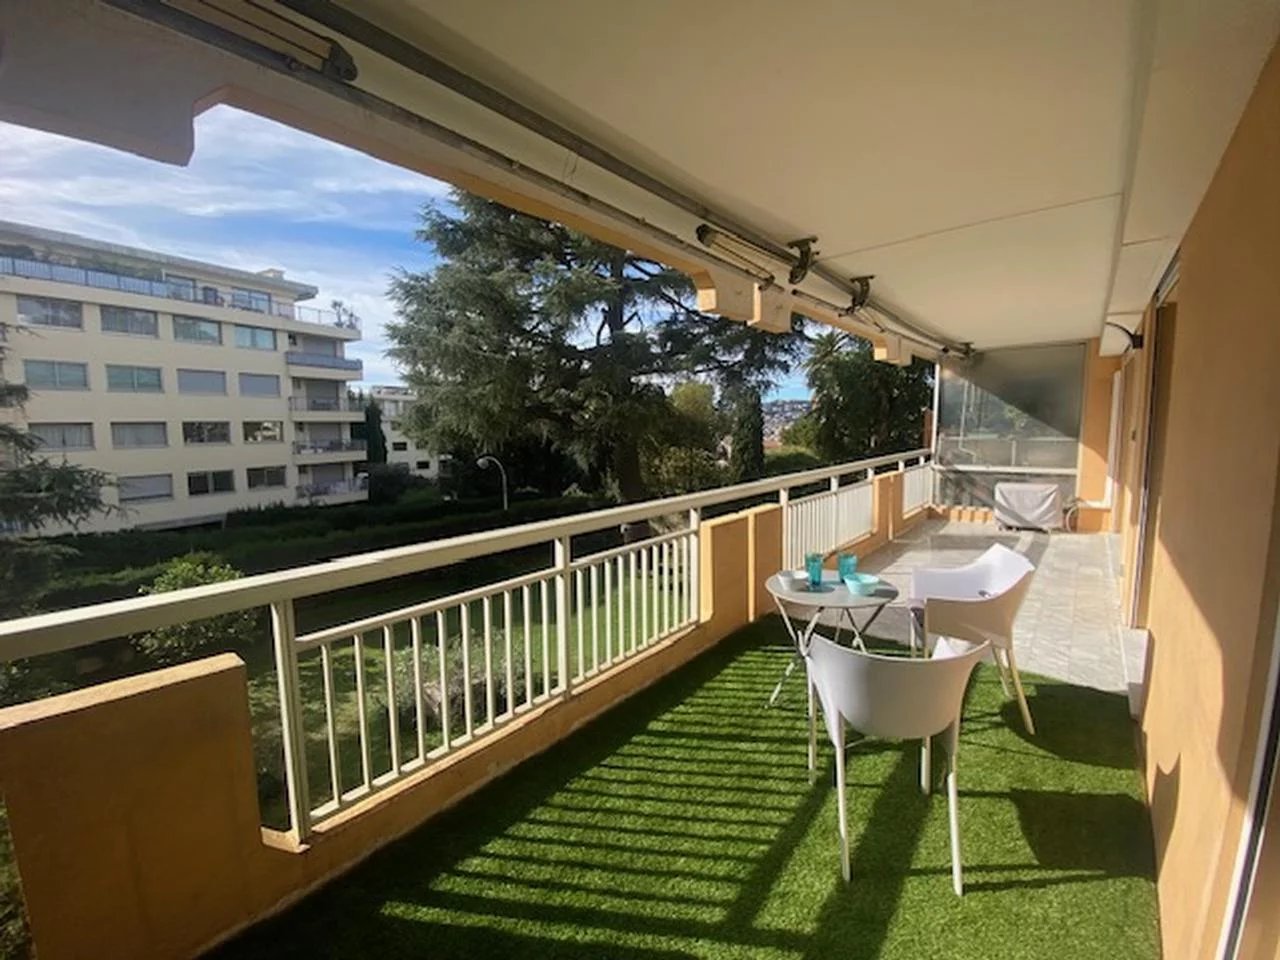 Appartement  2 Rooms 44.07m2  for sale   298 000 €